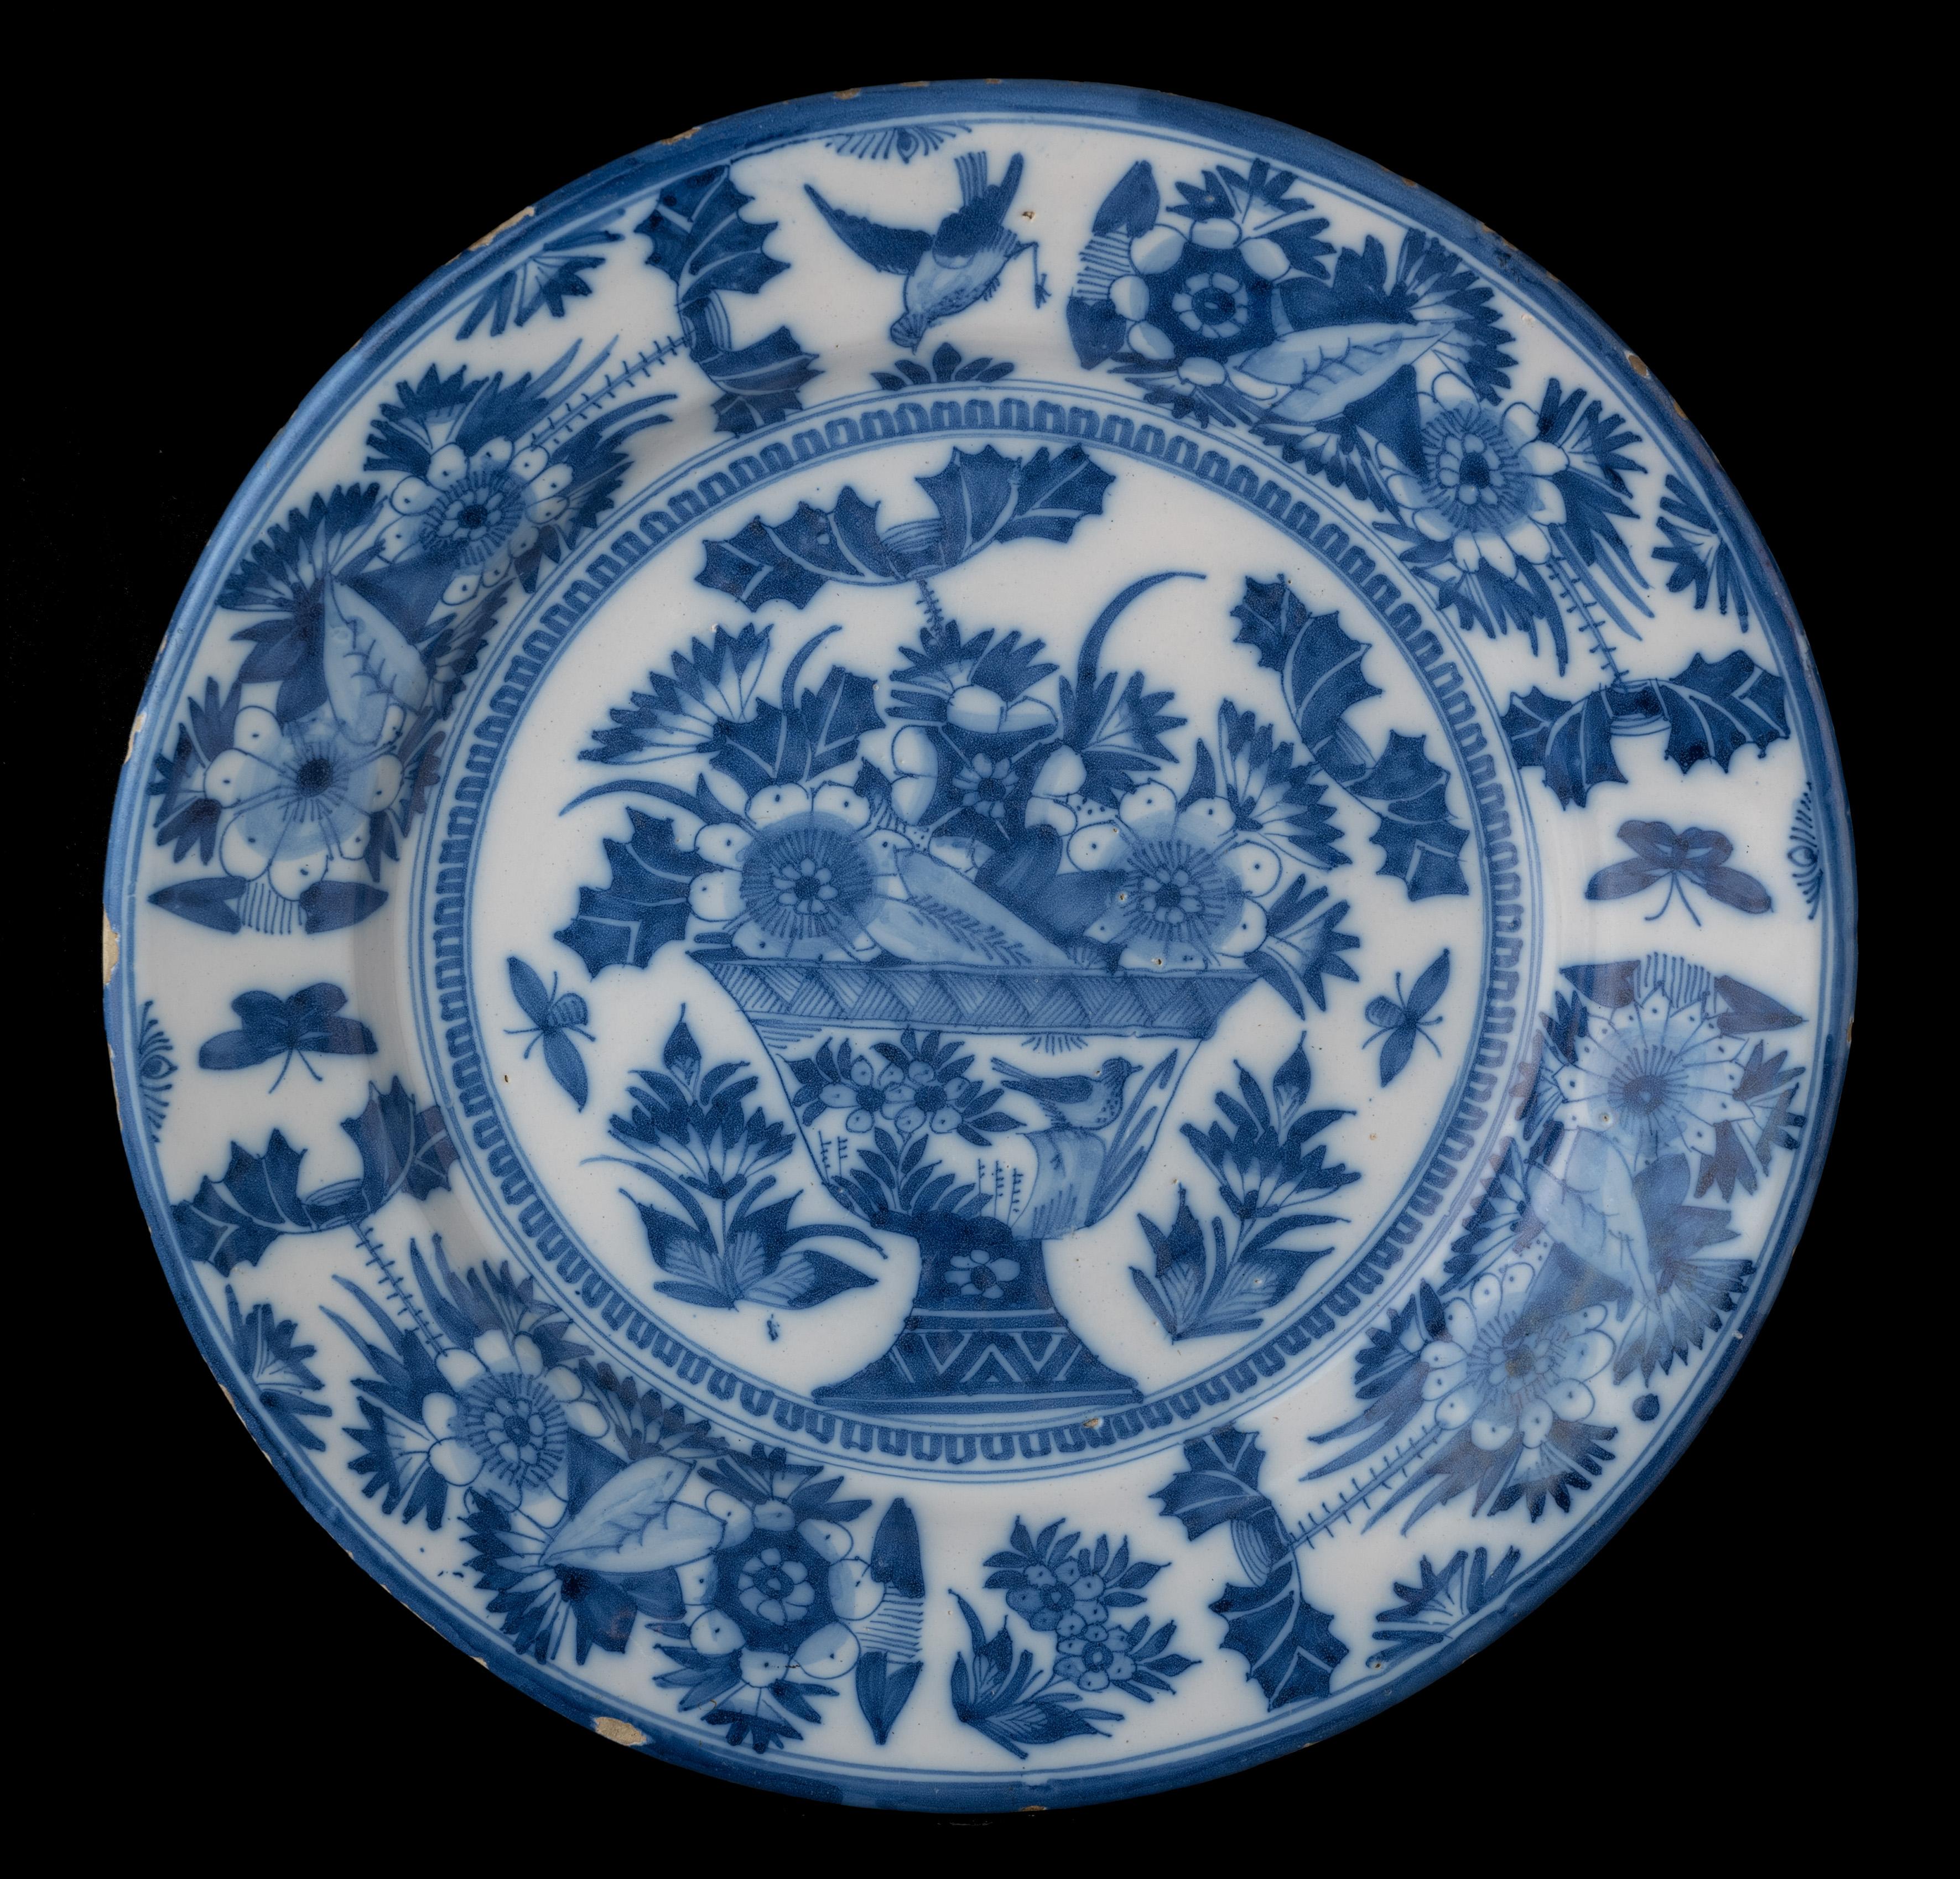 Blue and white dish with flower vase. Delft, 1665-1675
The blue and white dish has a wide, spreading rim and is painted in the centre with a vase with flowers, floral sprays and butterflies. The vase itself is also decorated with flowers and a bird